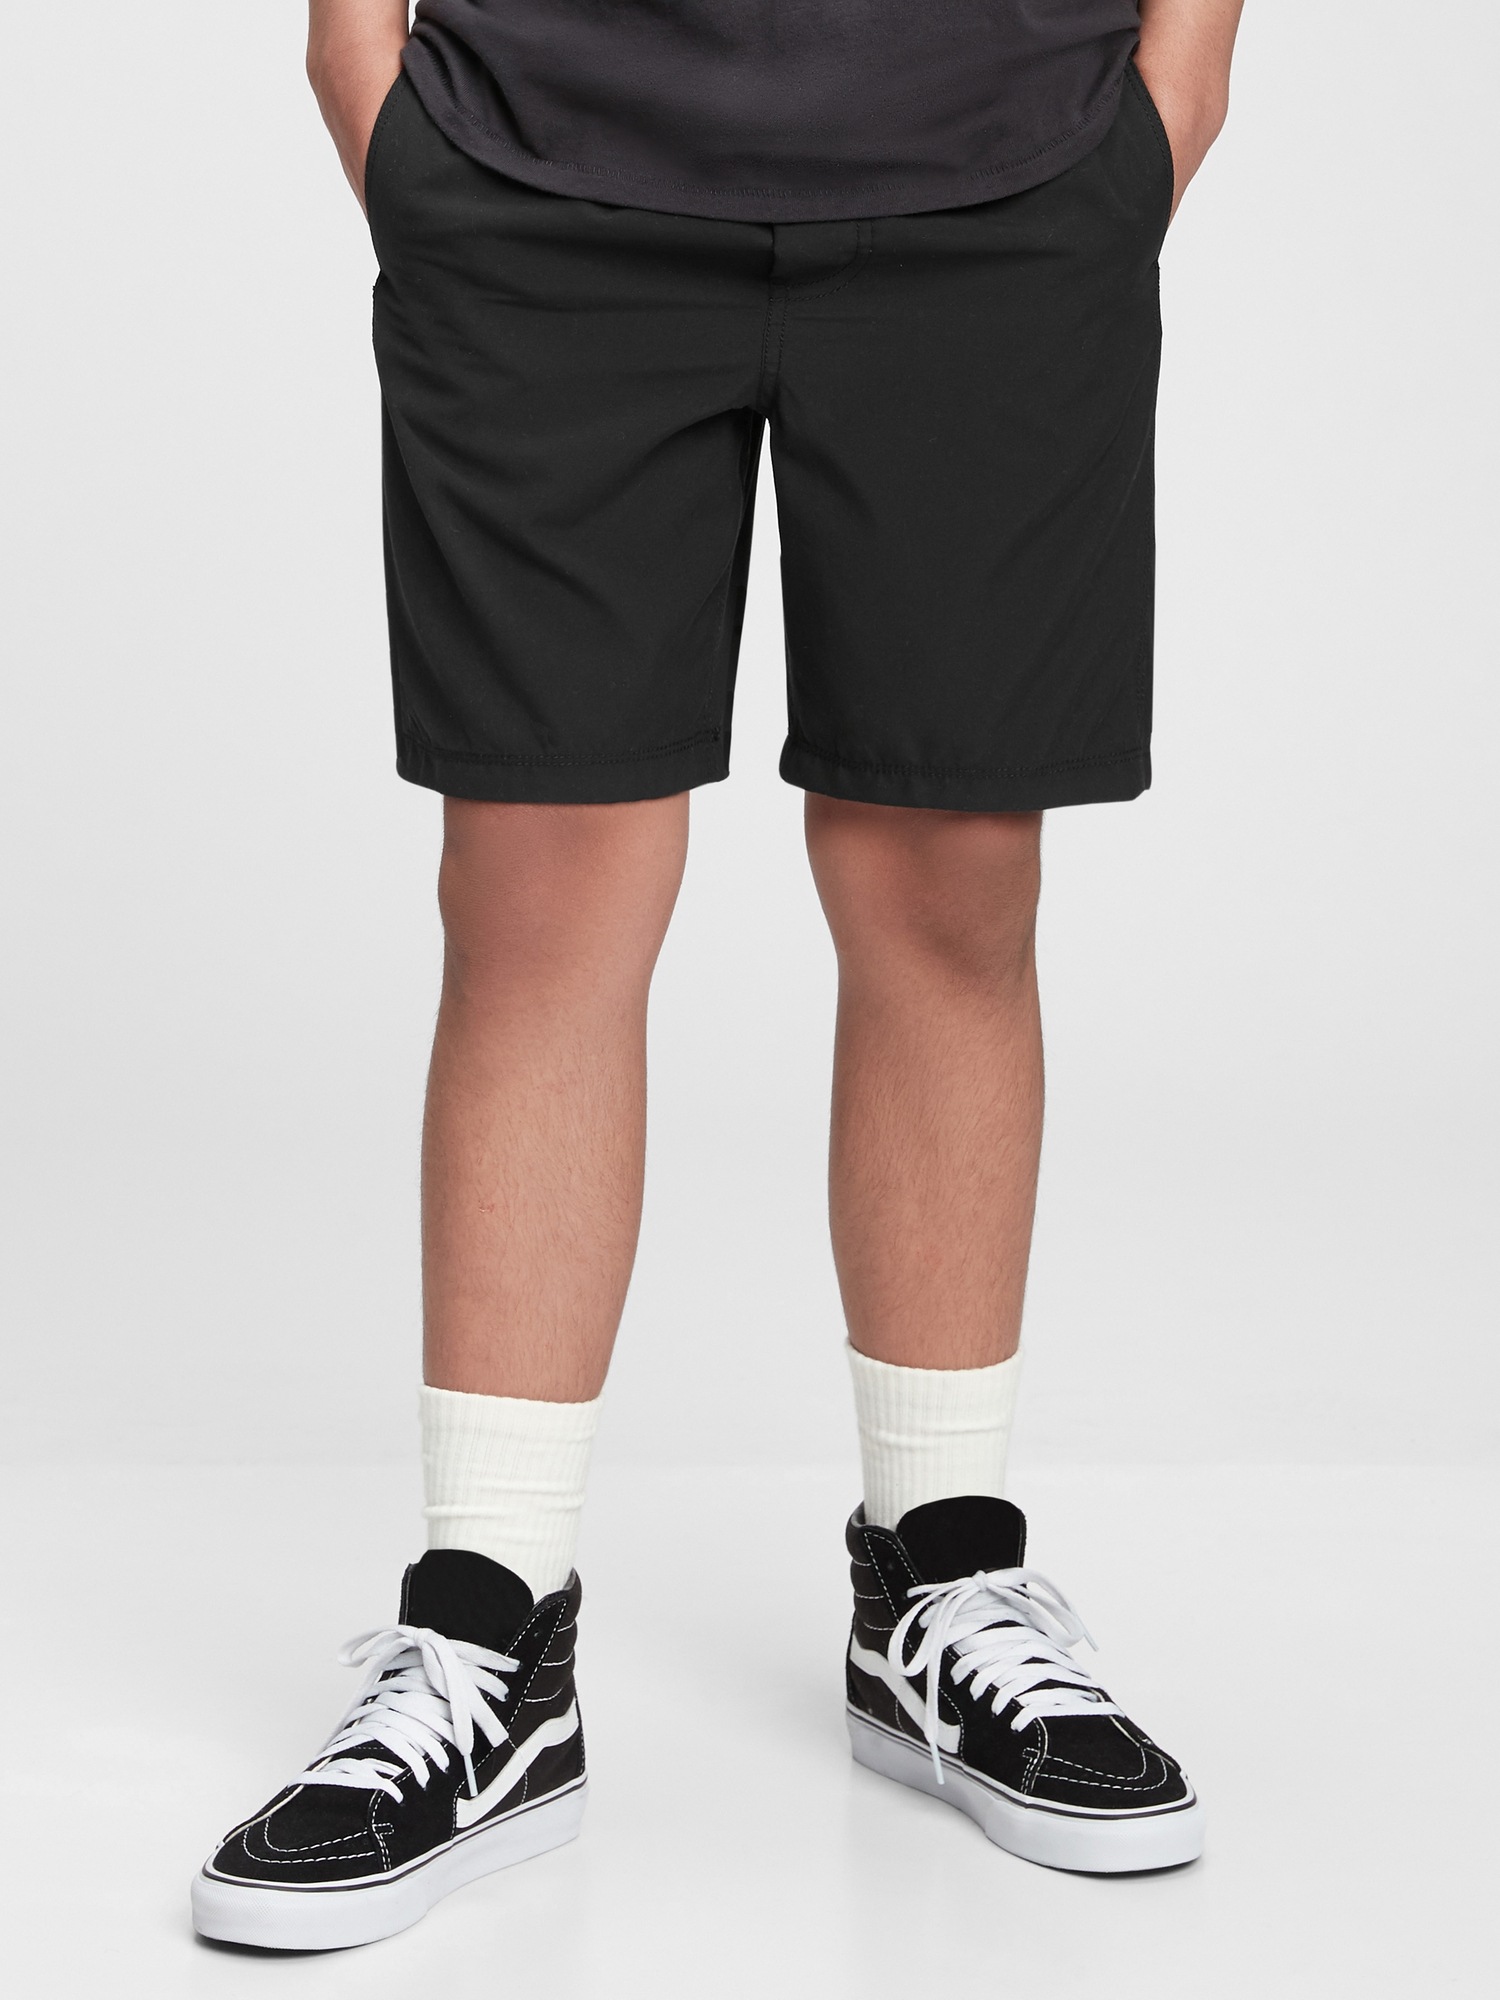 Teen Recycled Liner Pull-On Shorts